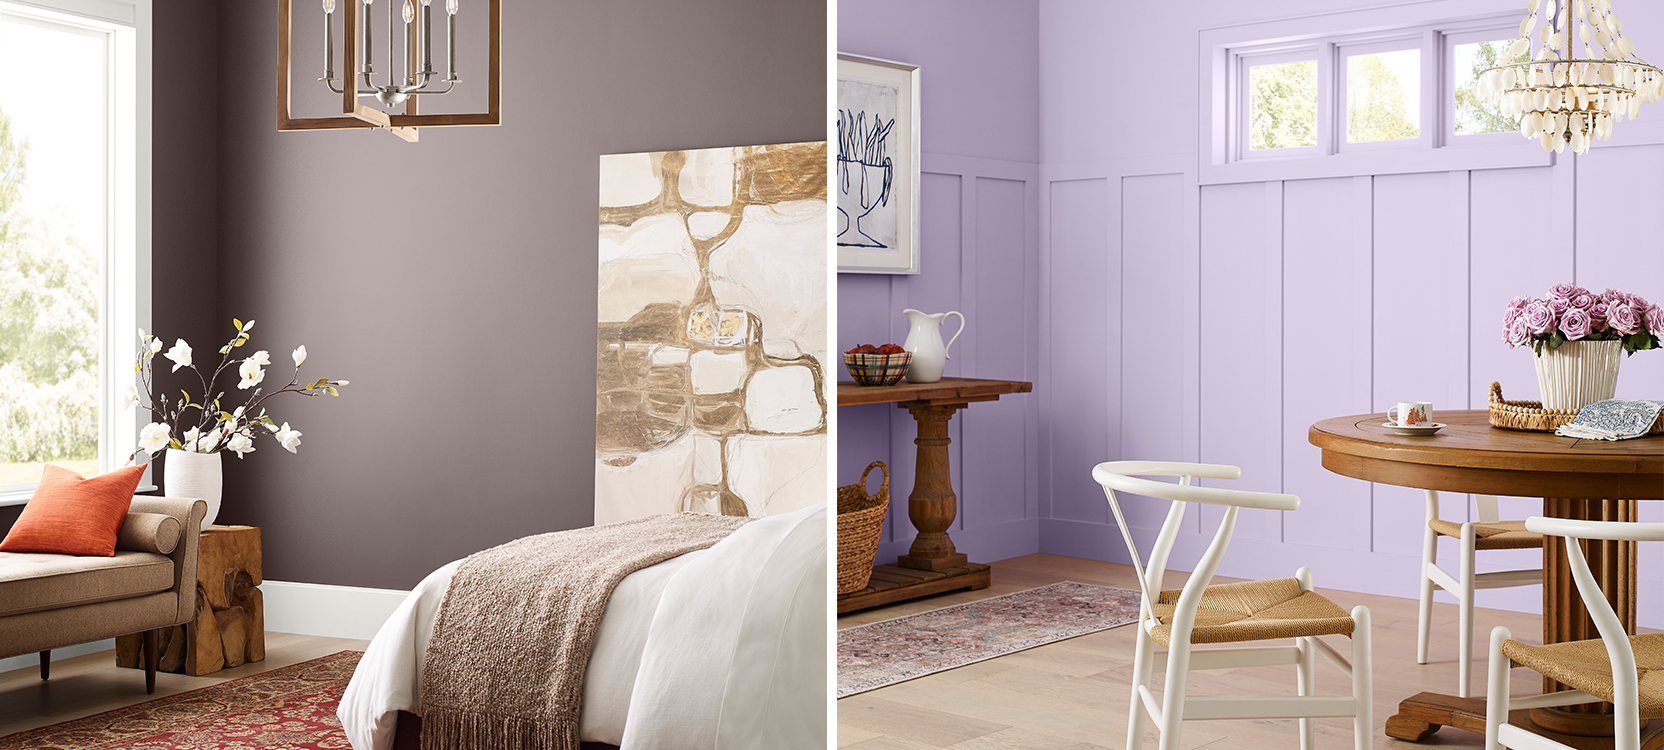 First image: Soothing bedroom with purple-gray walls and white trim, bed with neutral bedding in foreground with large leaning art piece, red floral rug, upholstered settee and wood block accent table with large white vase and flowers in front of window. Second image: Cheerful dining area with light wood floors, lilac board-and-batten walls, seashell chandelier over round wood table surrounded by white wishbone dining chairs.